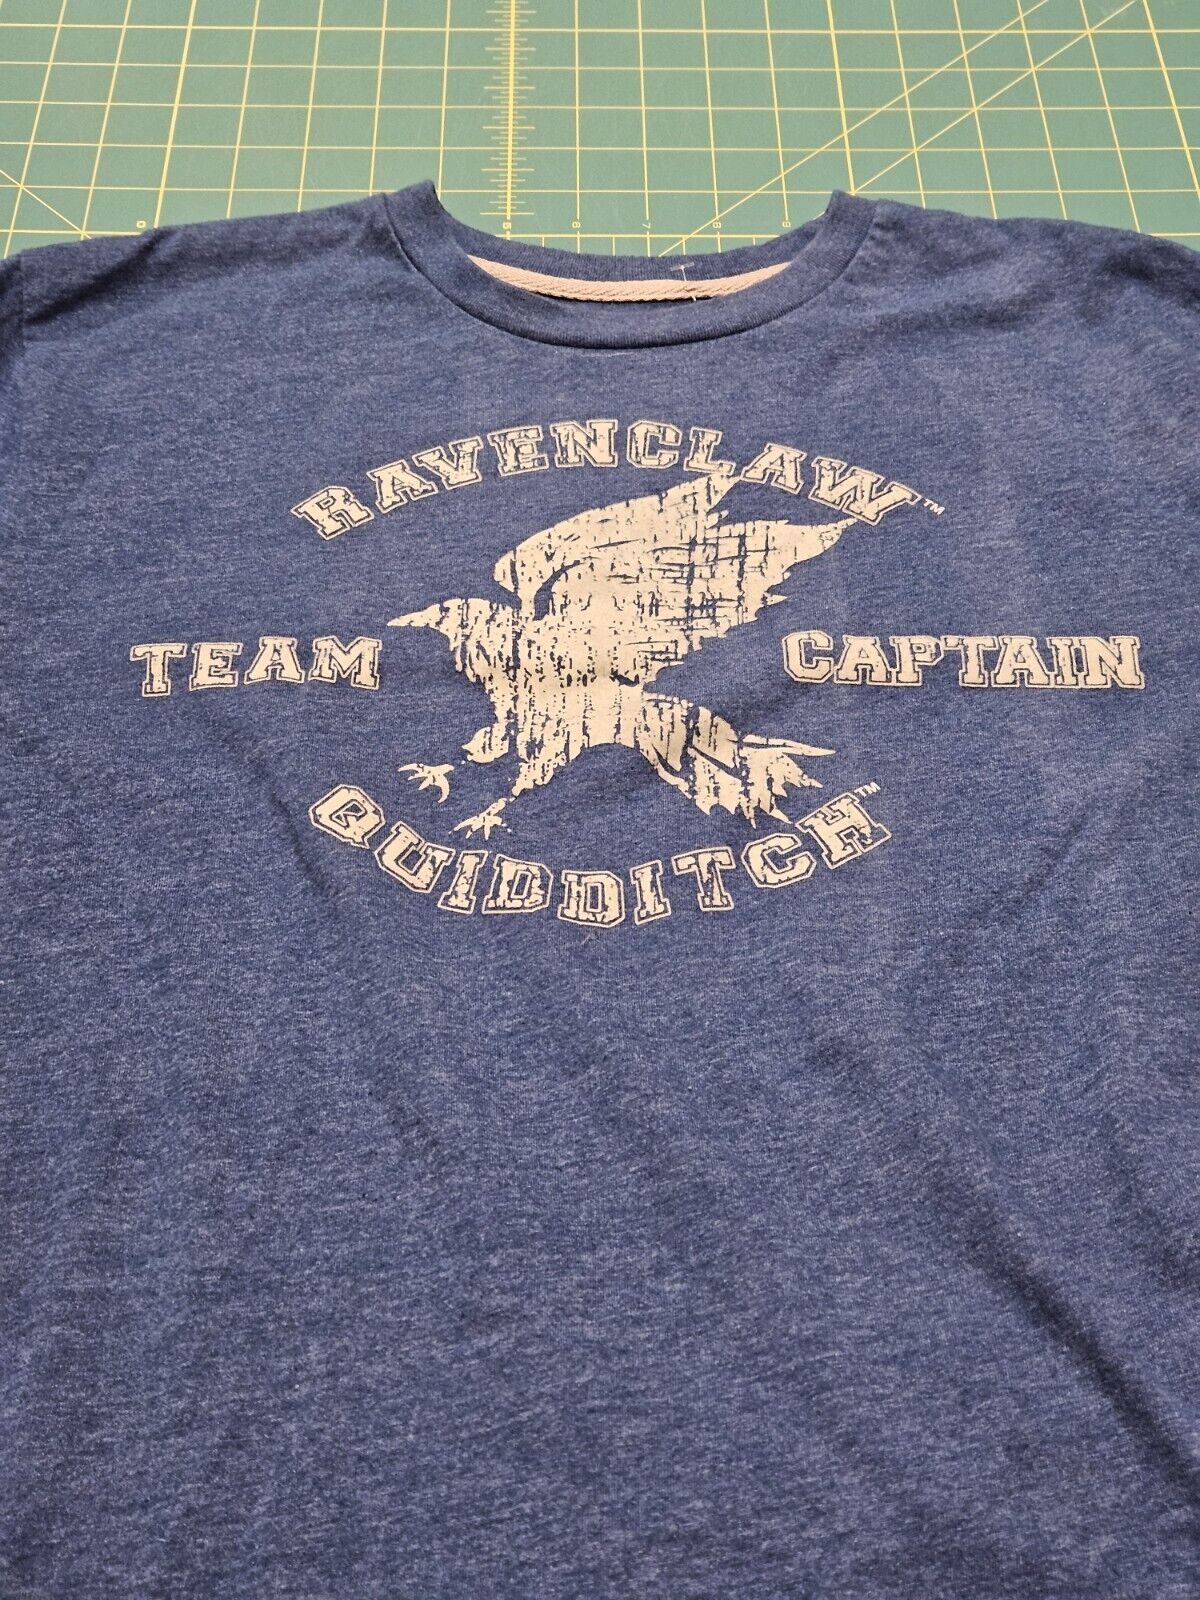 Wizarding World of Harry Potter Ravenclaw Quidditch Team Captain T-Shirt Small 